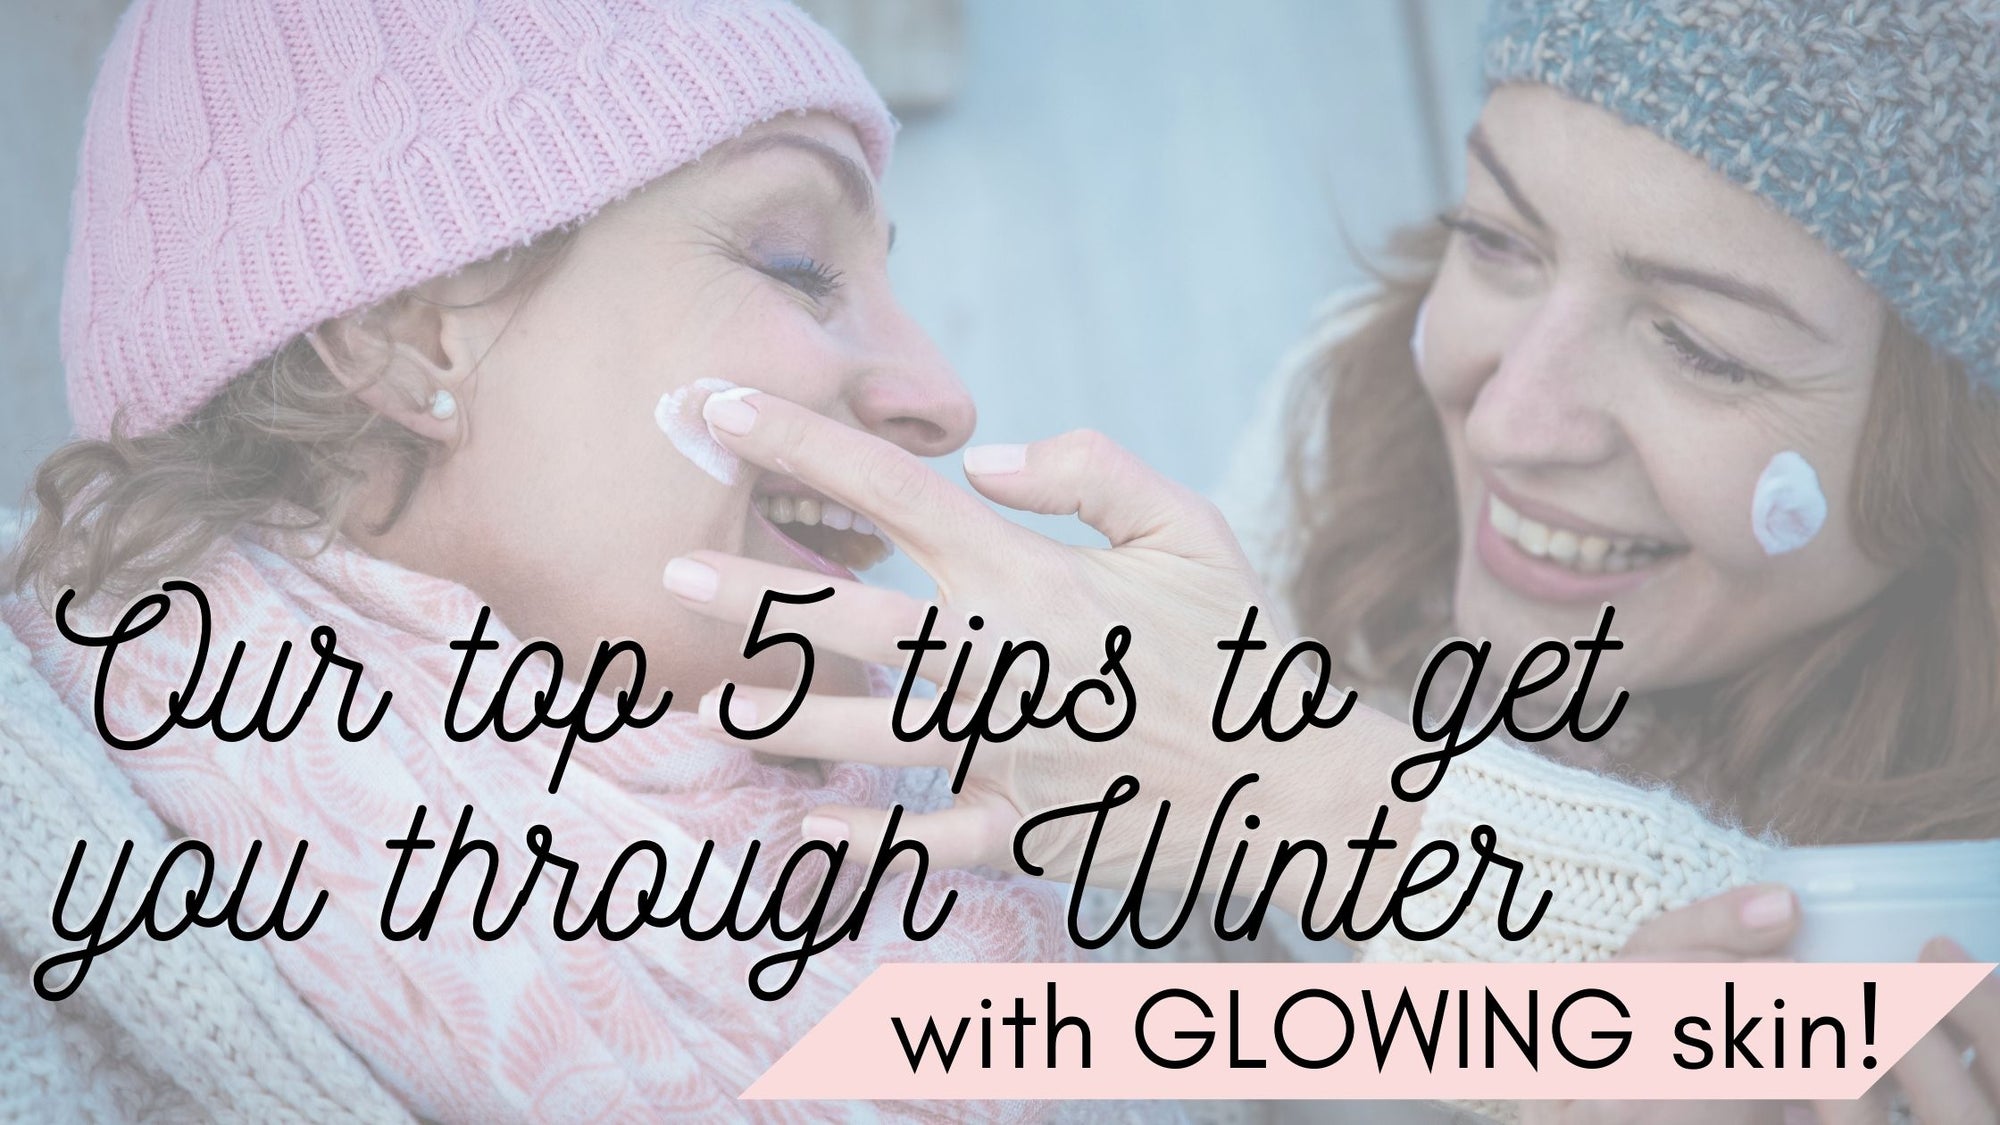 Our top 5 tips to combat dry Winter skin